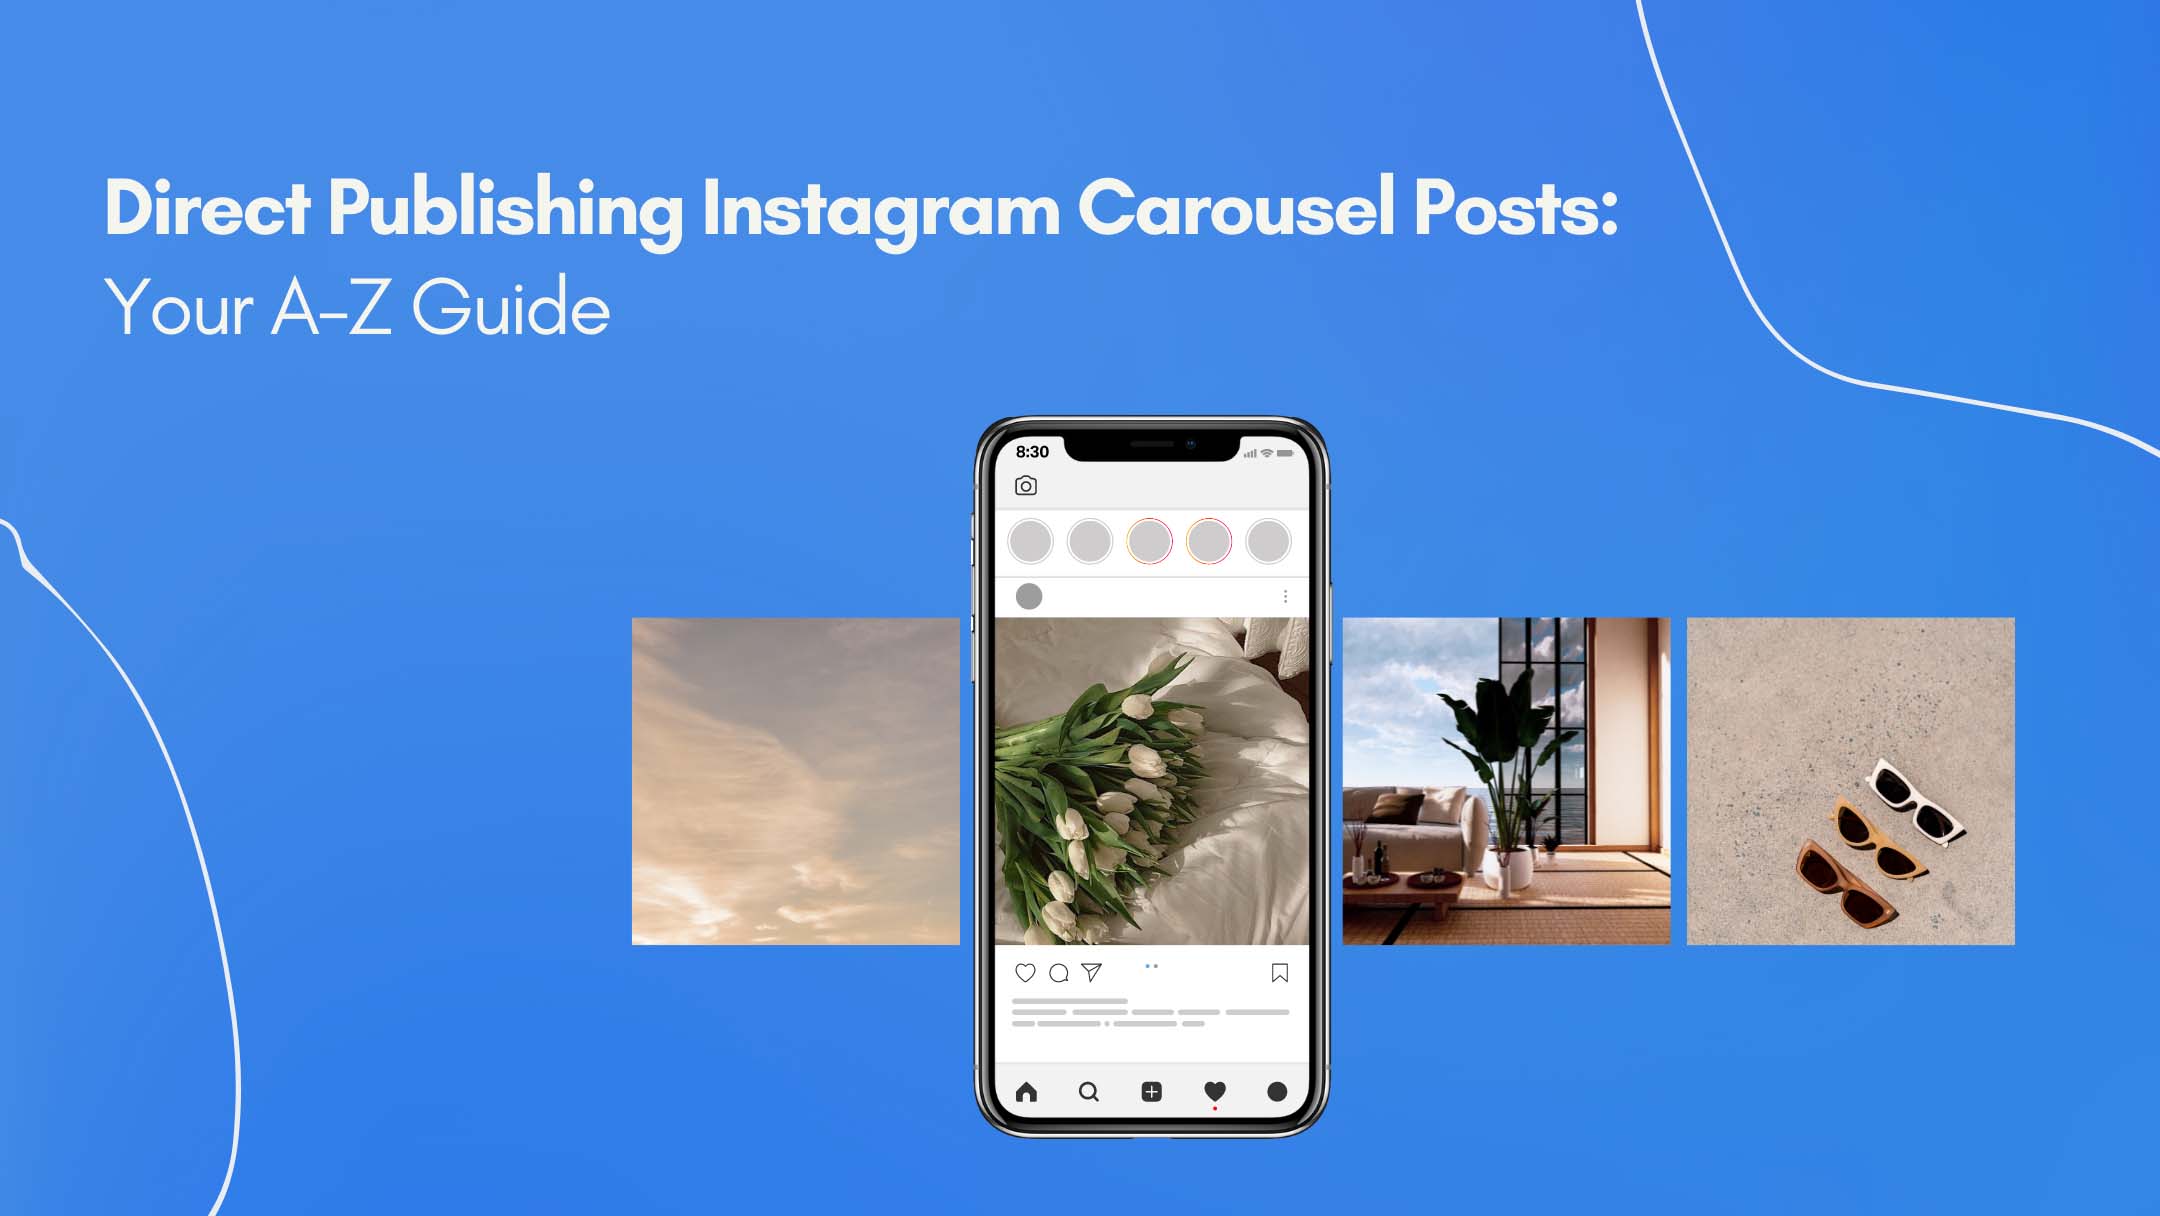 Direct Publishing Instagram Carousel Posts: Your A-Z Guide